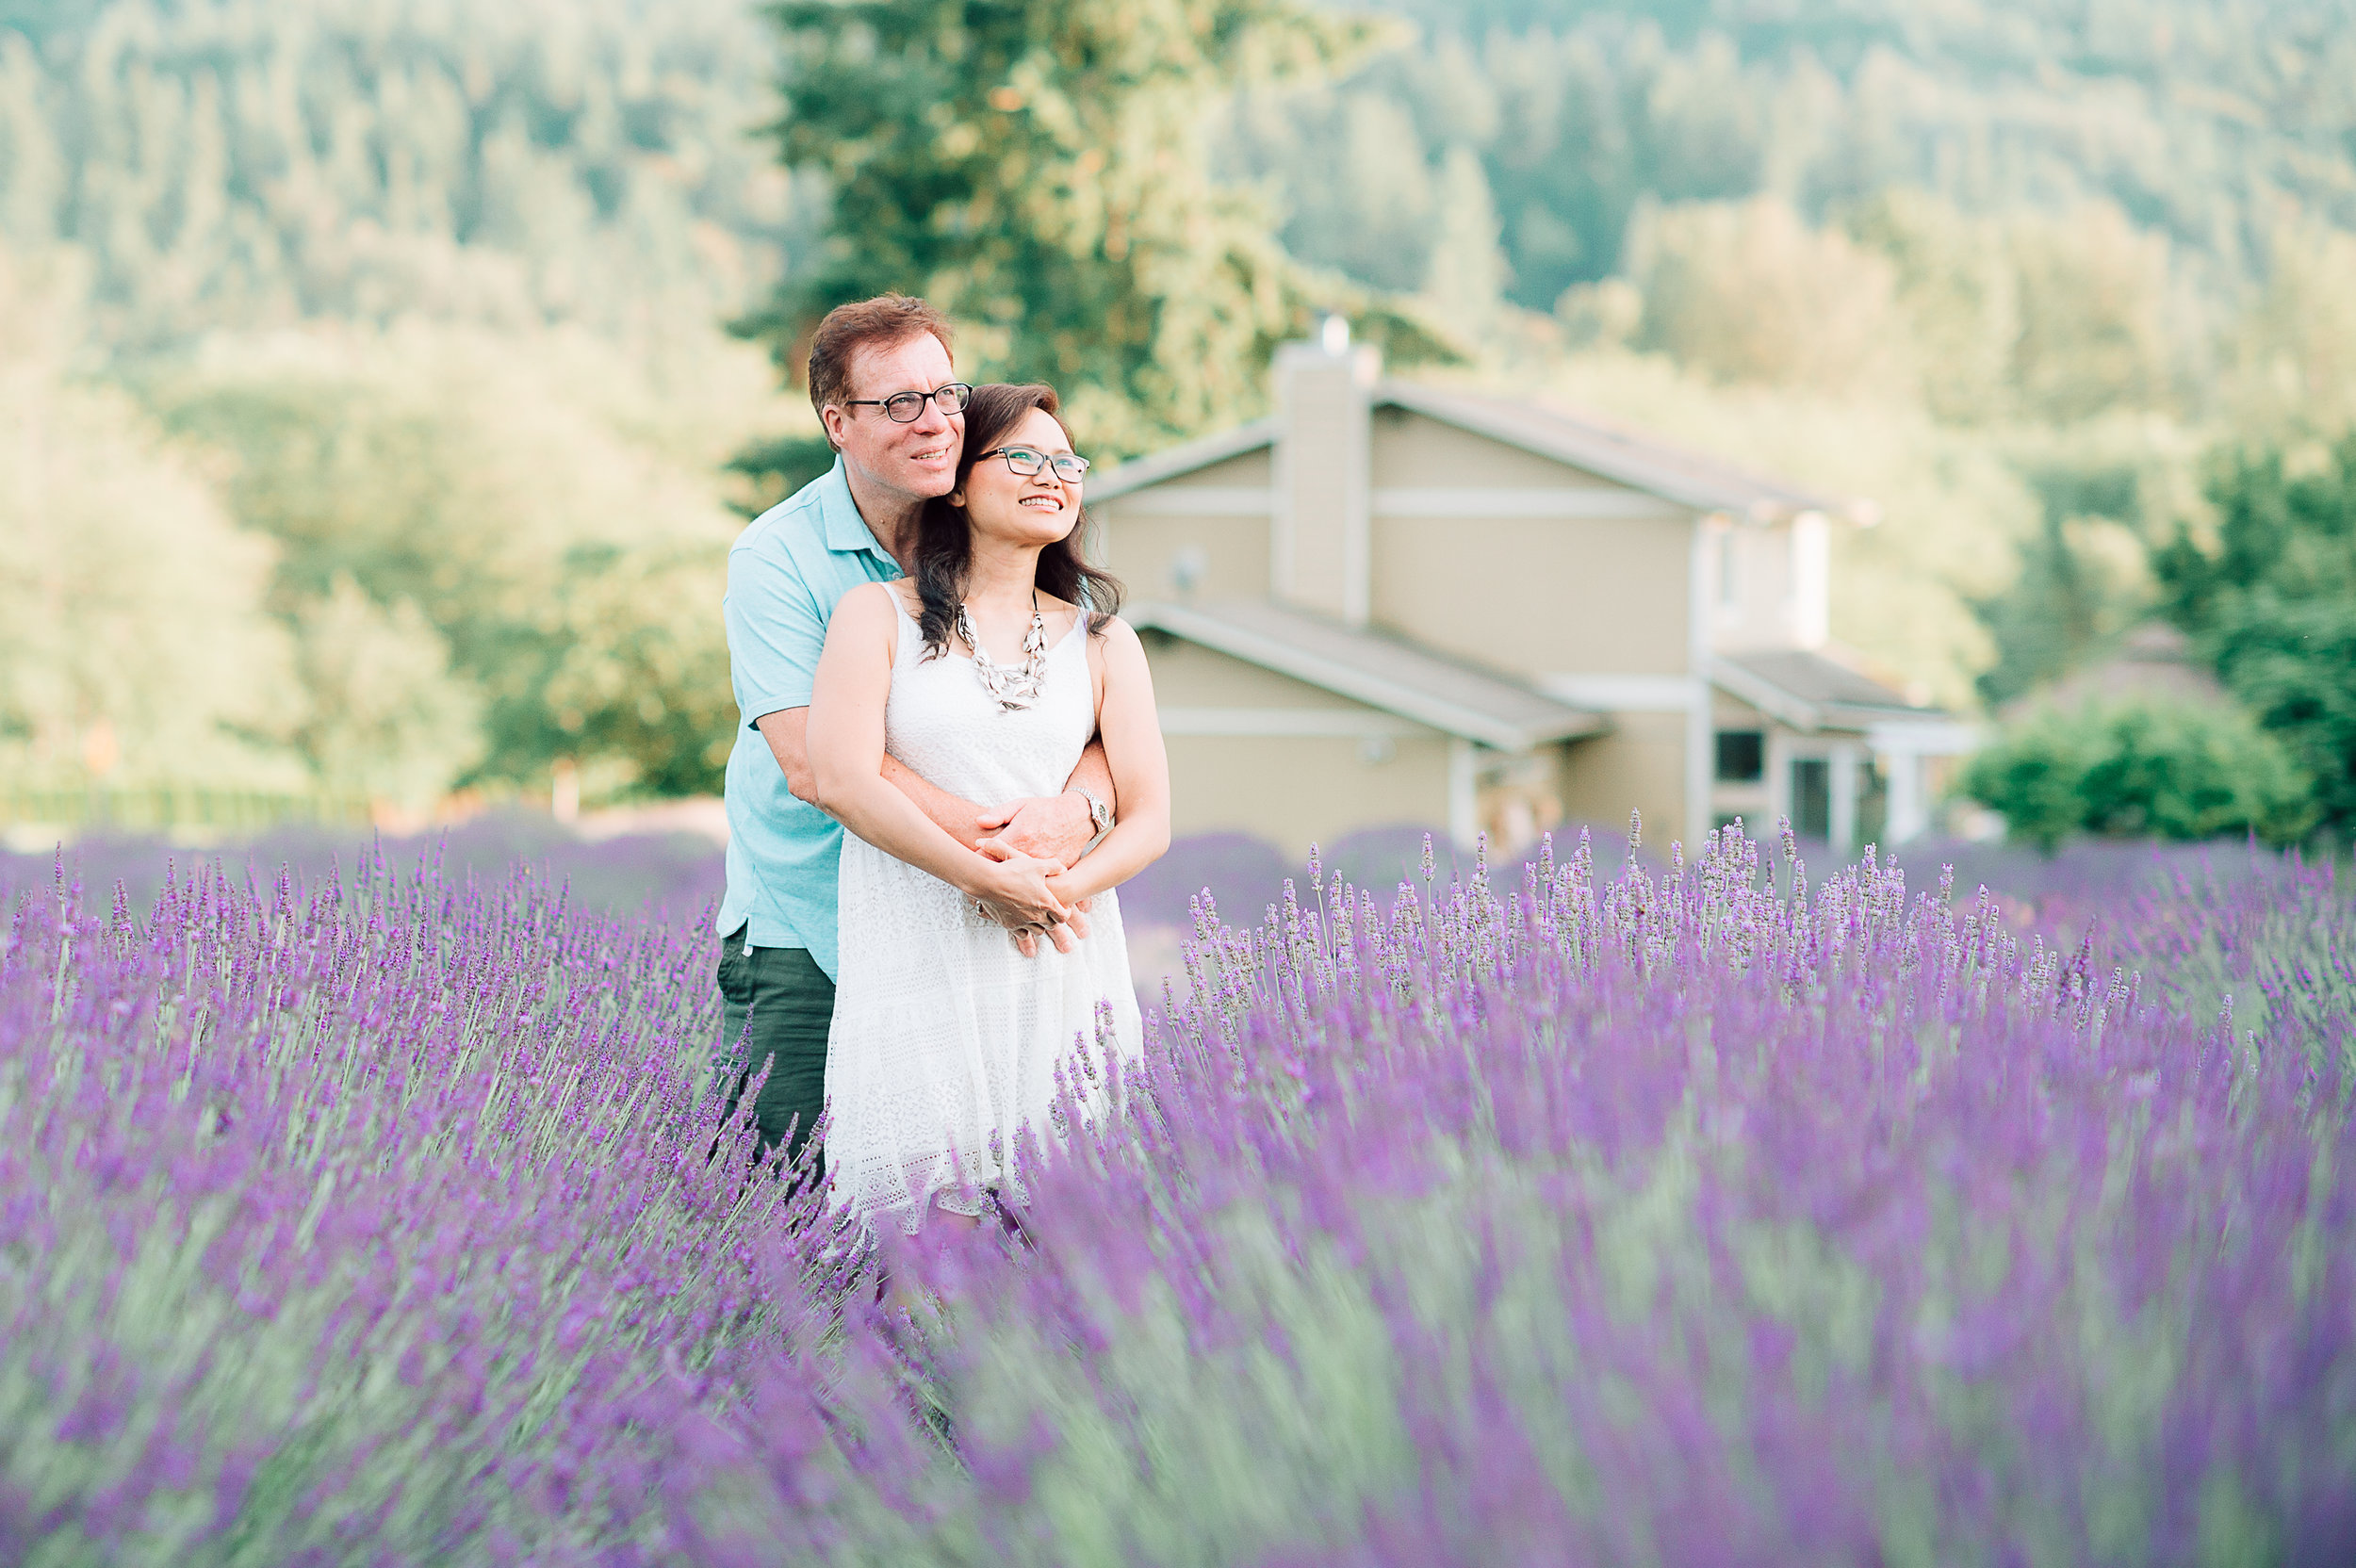 engagement_lavenderfield_youseephotography_LidiaOtto (3).jpg